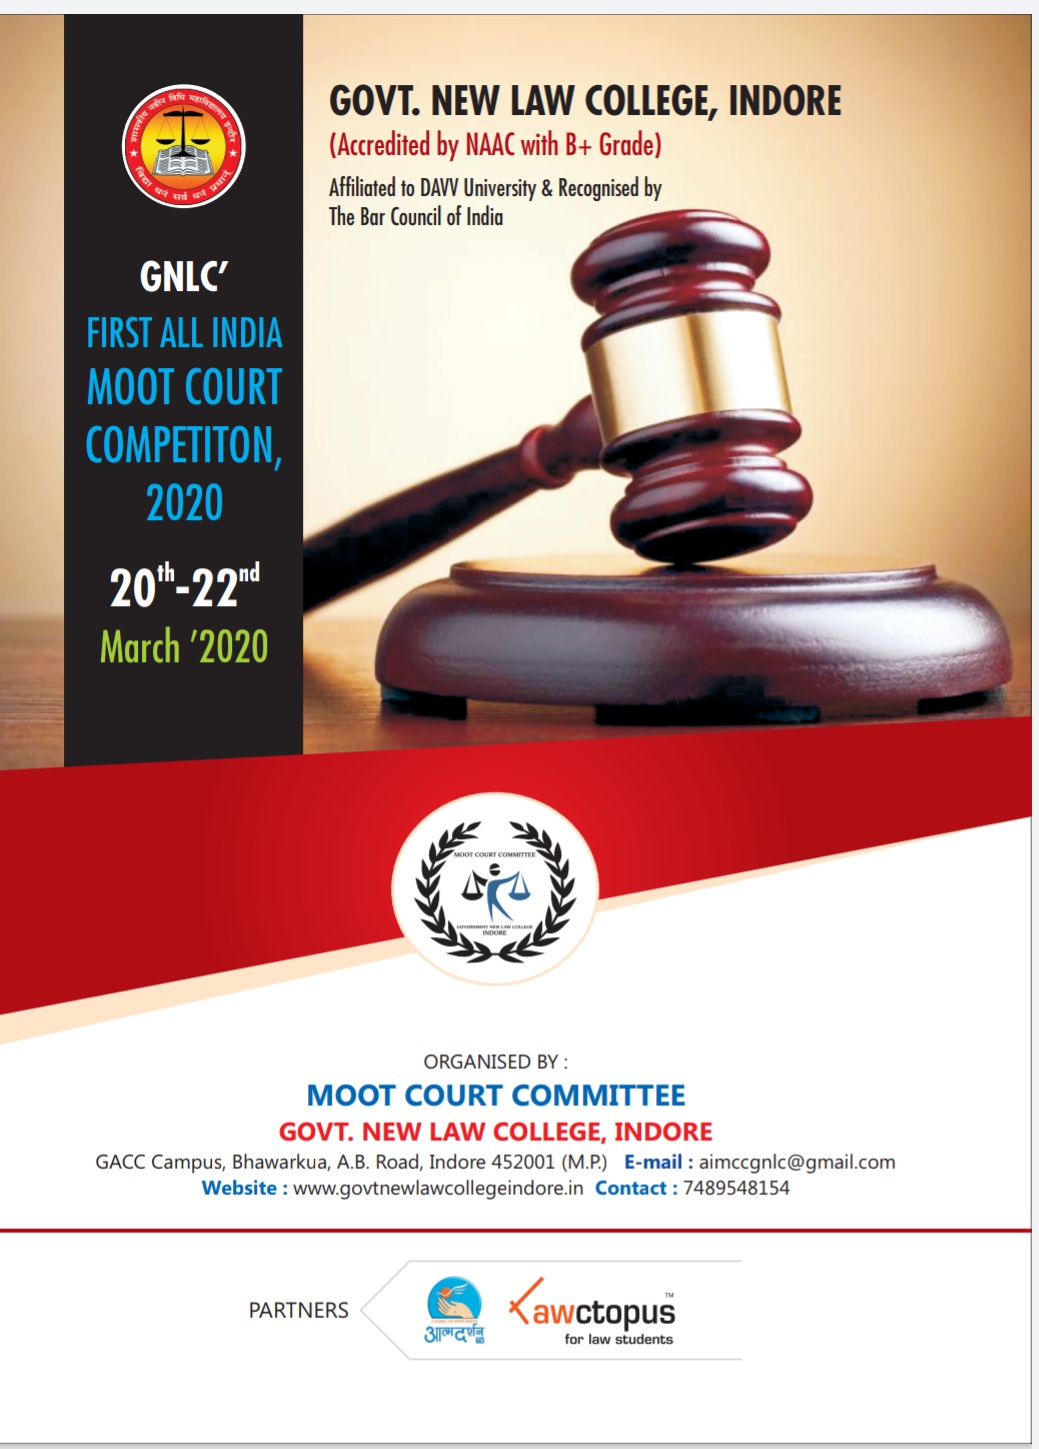 GNLC First All India Moot Court Competition 2020